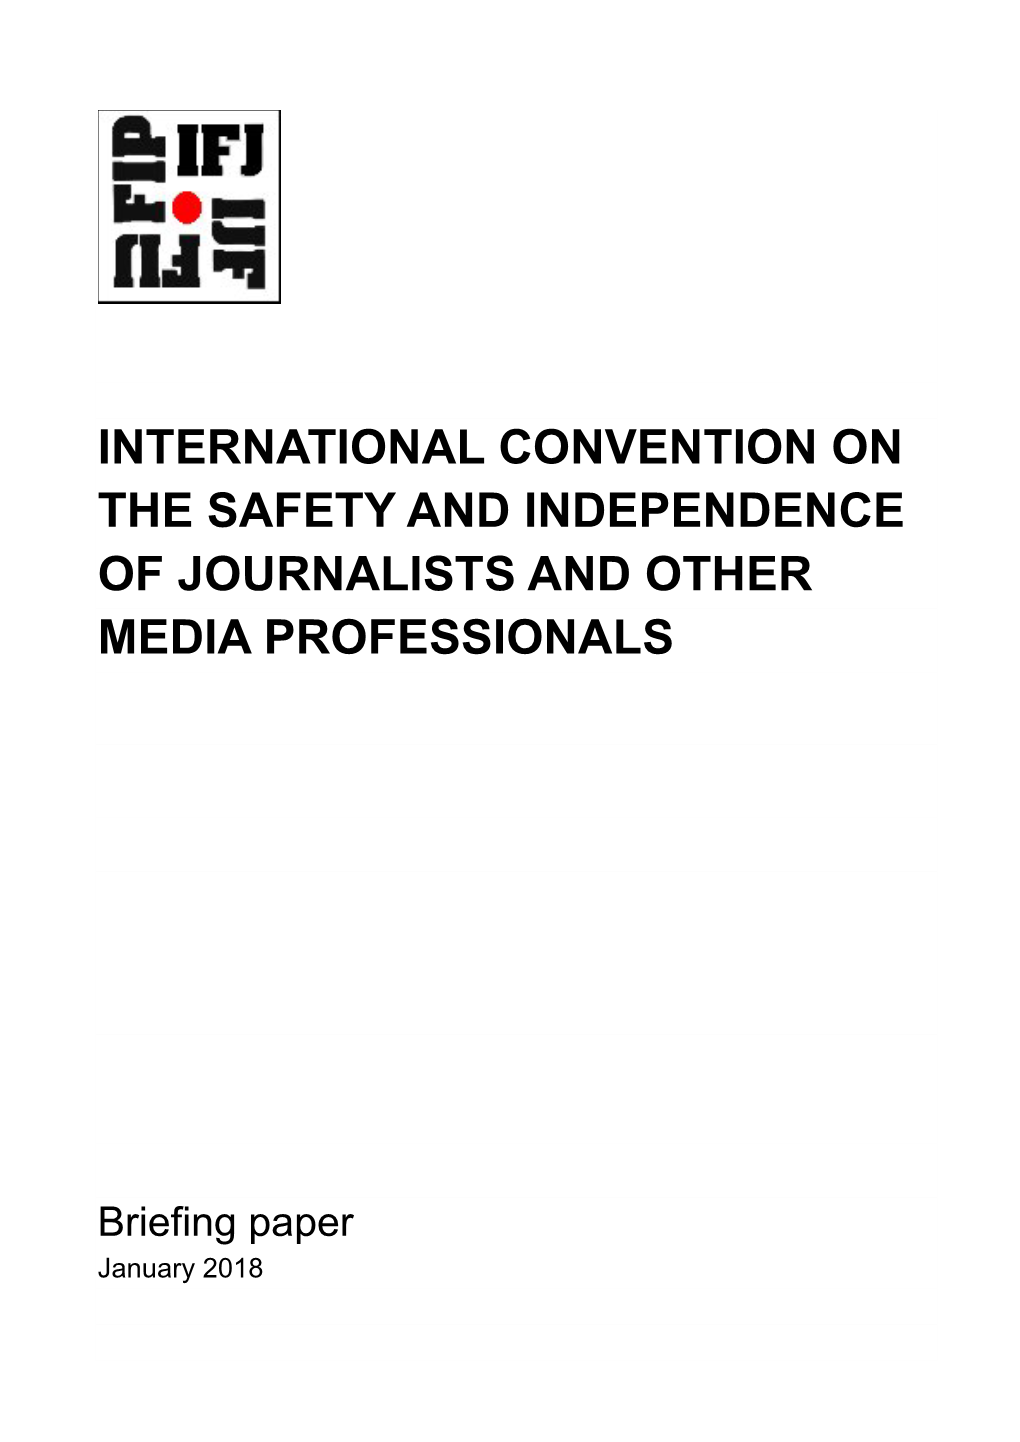 International Convention on the Safety and Independence of Journalists and Other Media Professionals